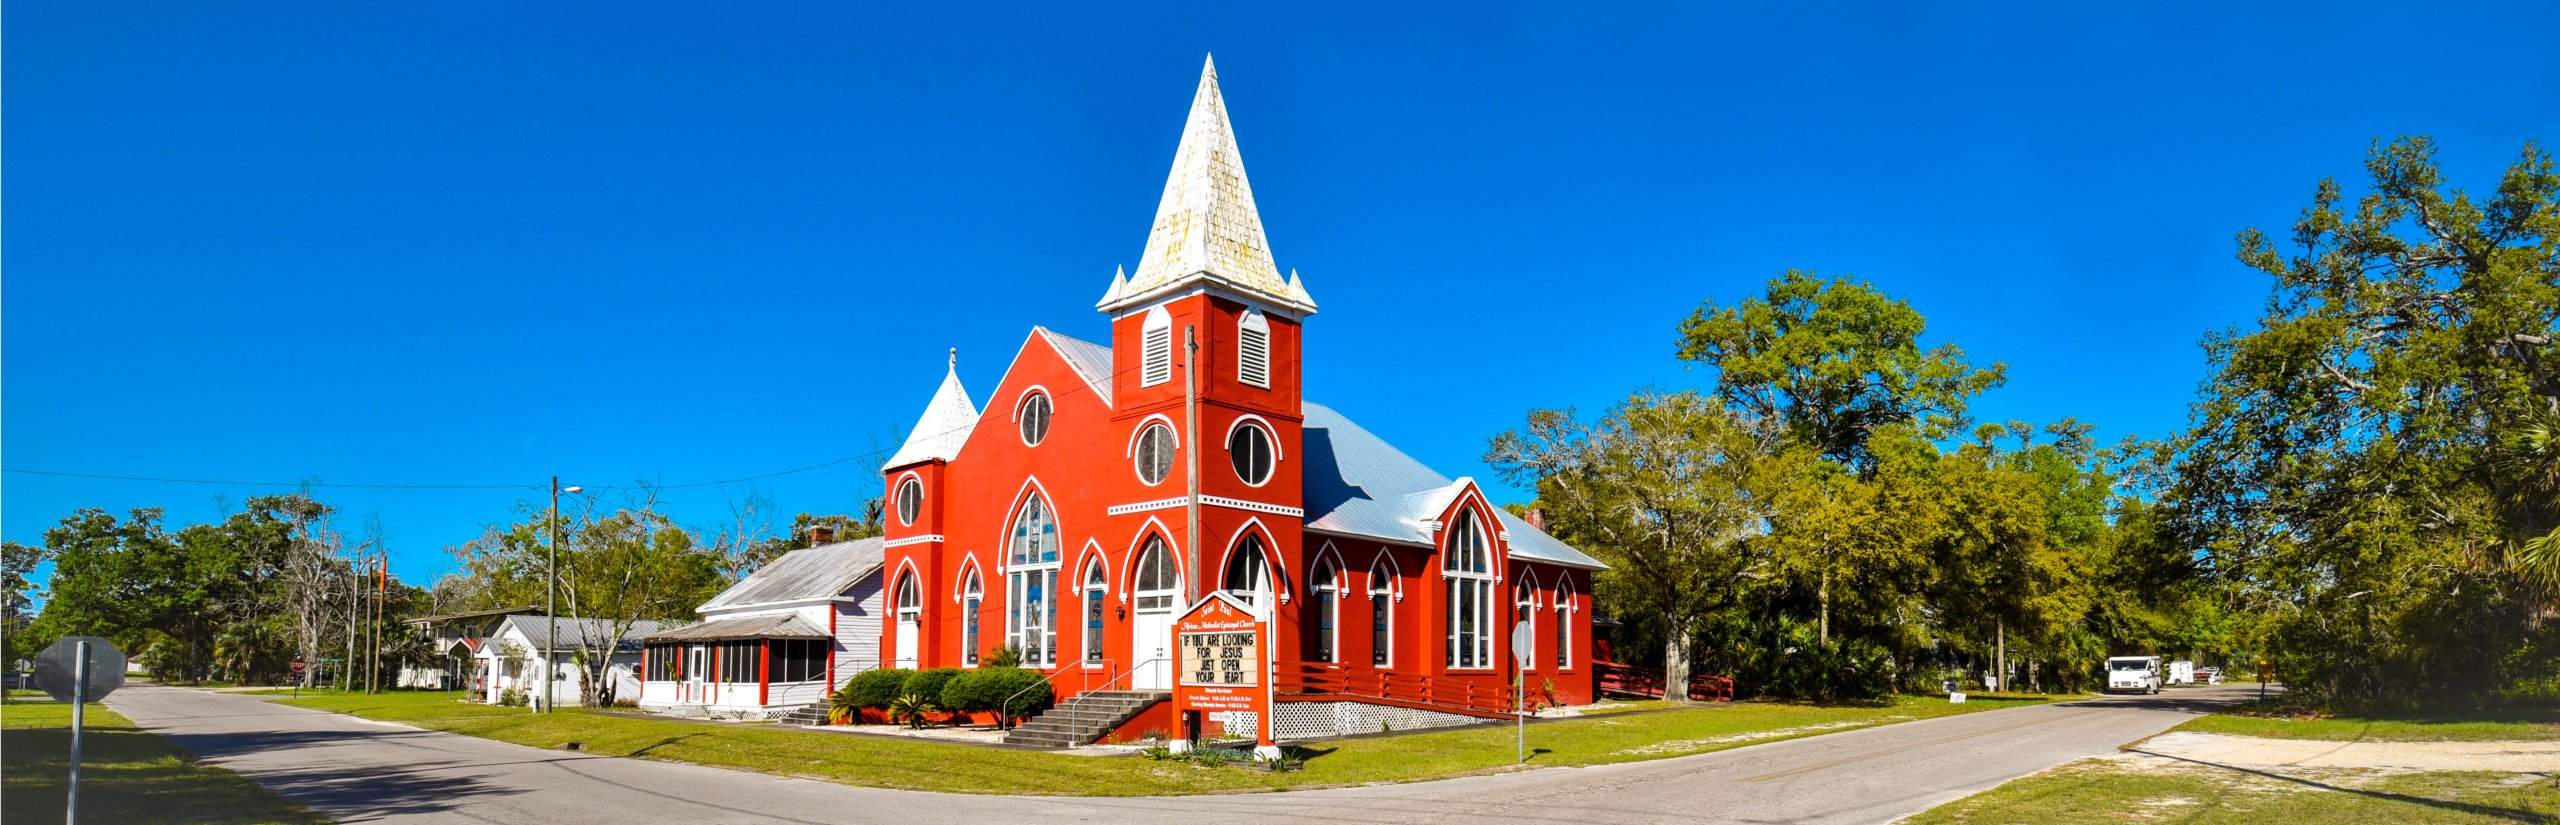 Apalachicola Bay Chamber of Commerce & Visitor Center